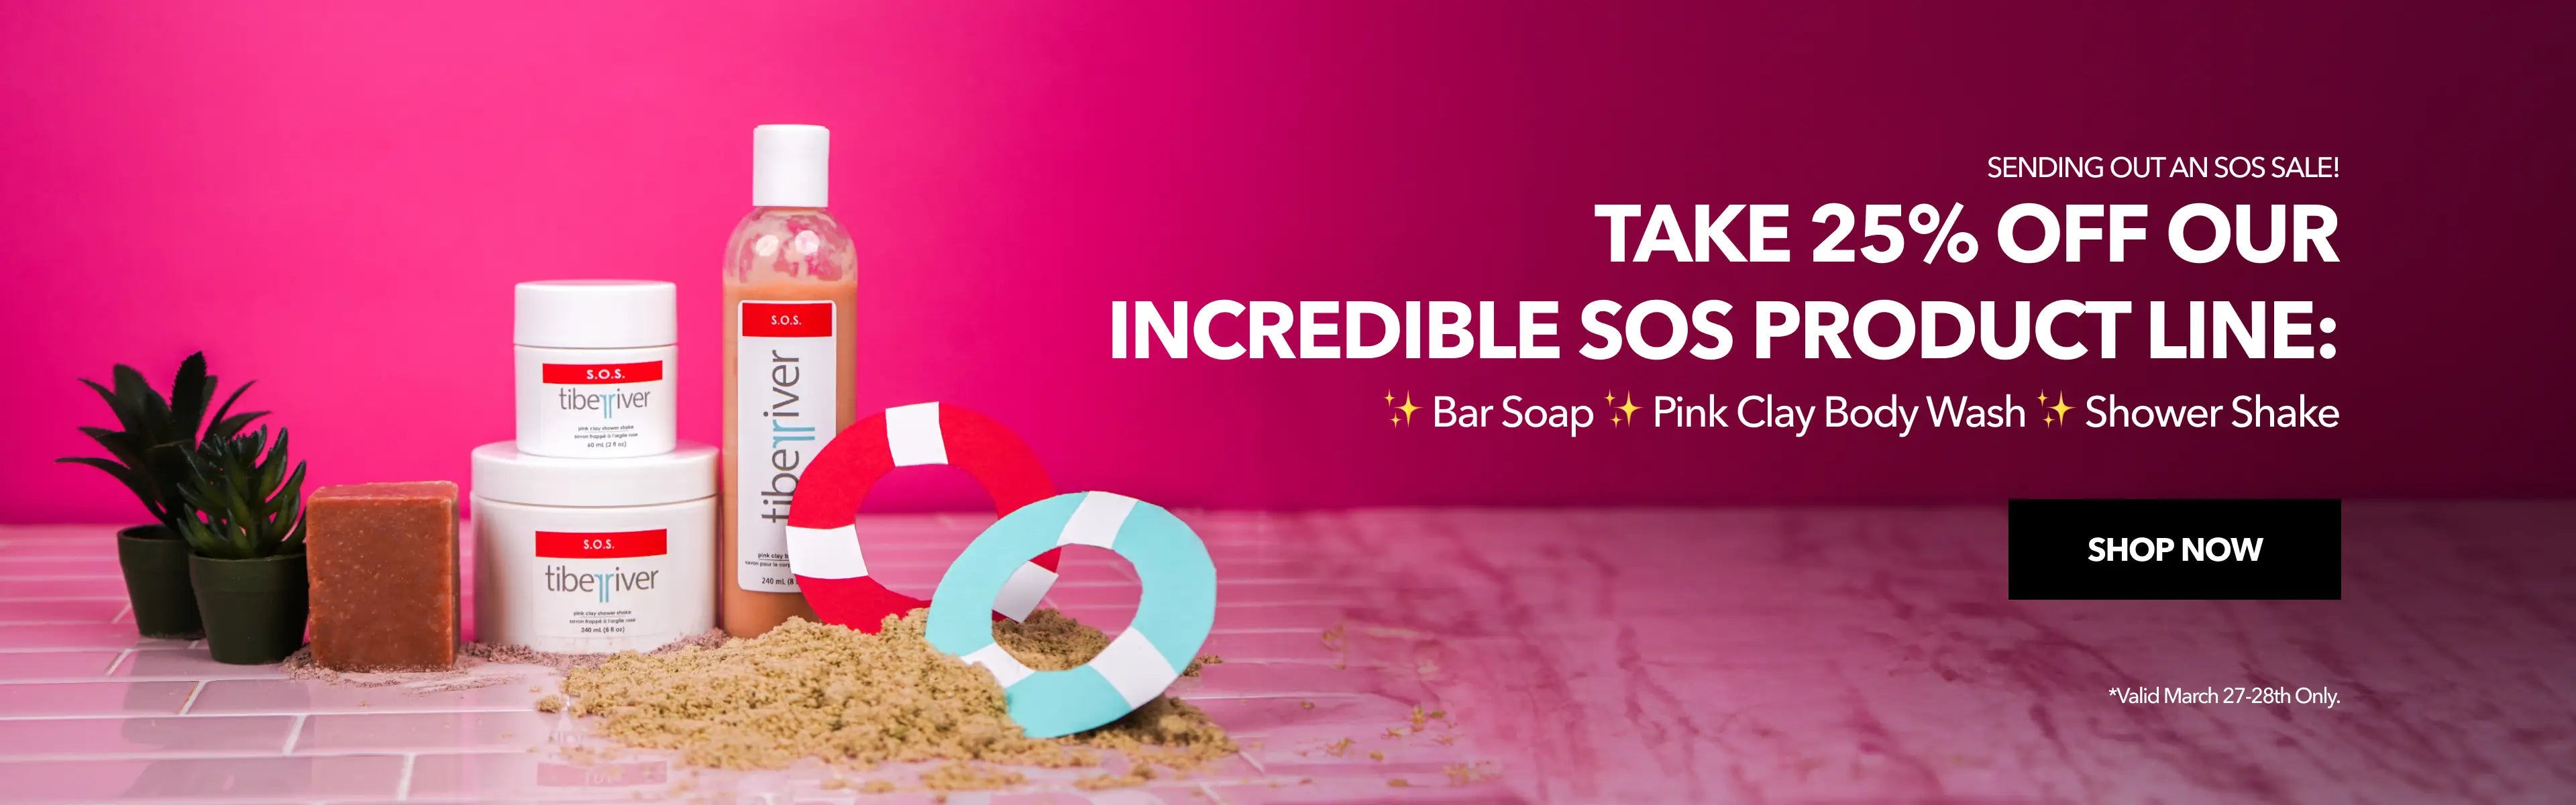 25% OFF SOS Products: Bar Soap, Body Wash, Shower Shake